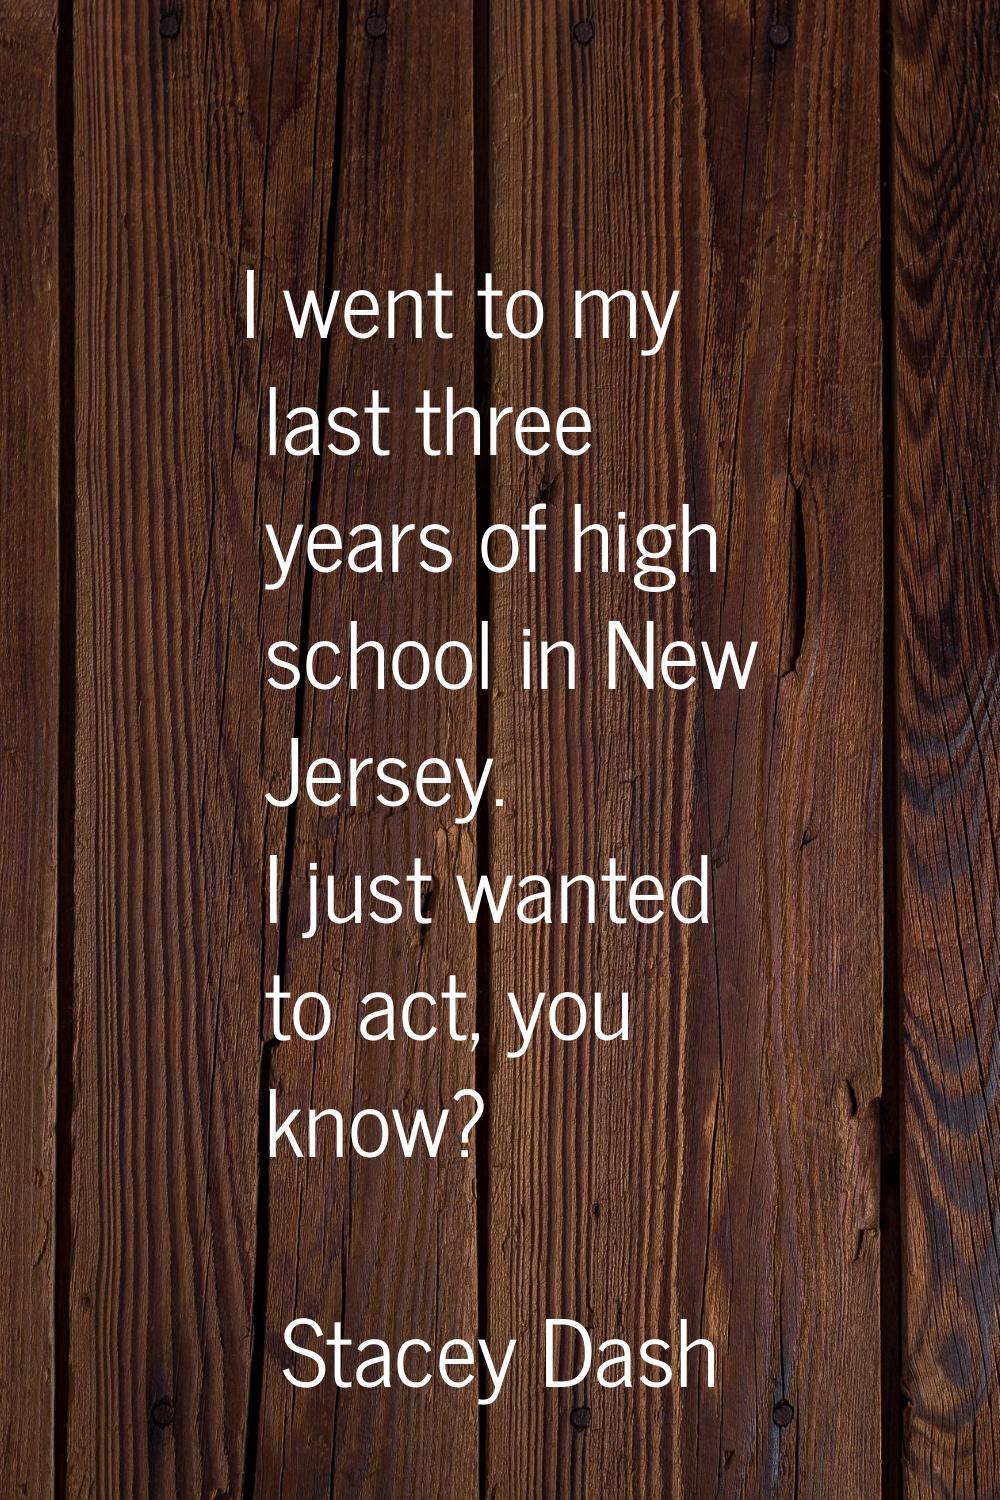 I went to my last three years of high school in New Jersey. I just wanted to act, you know?